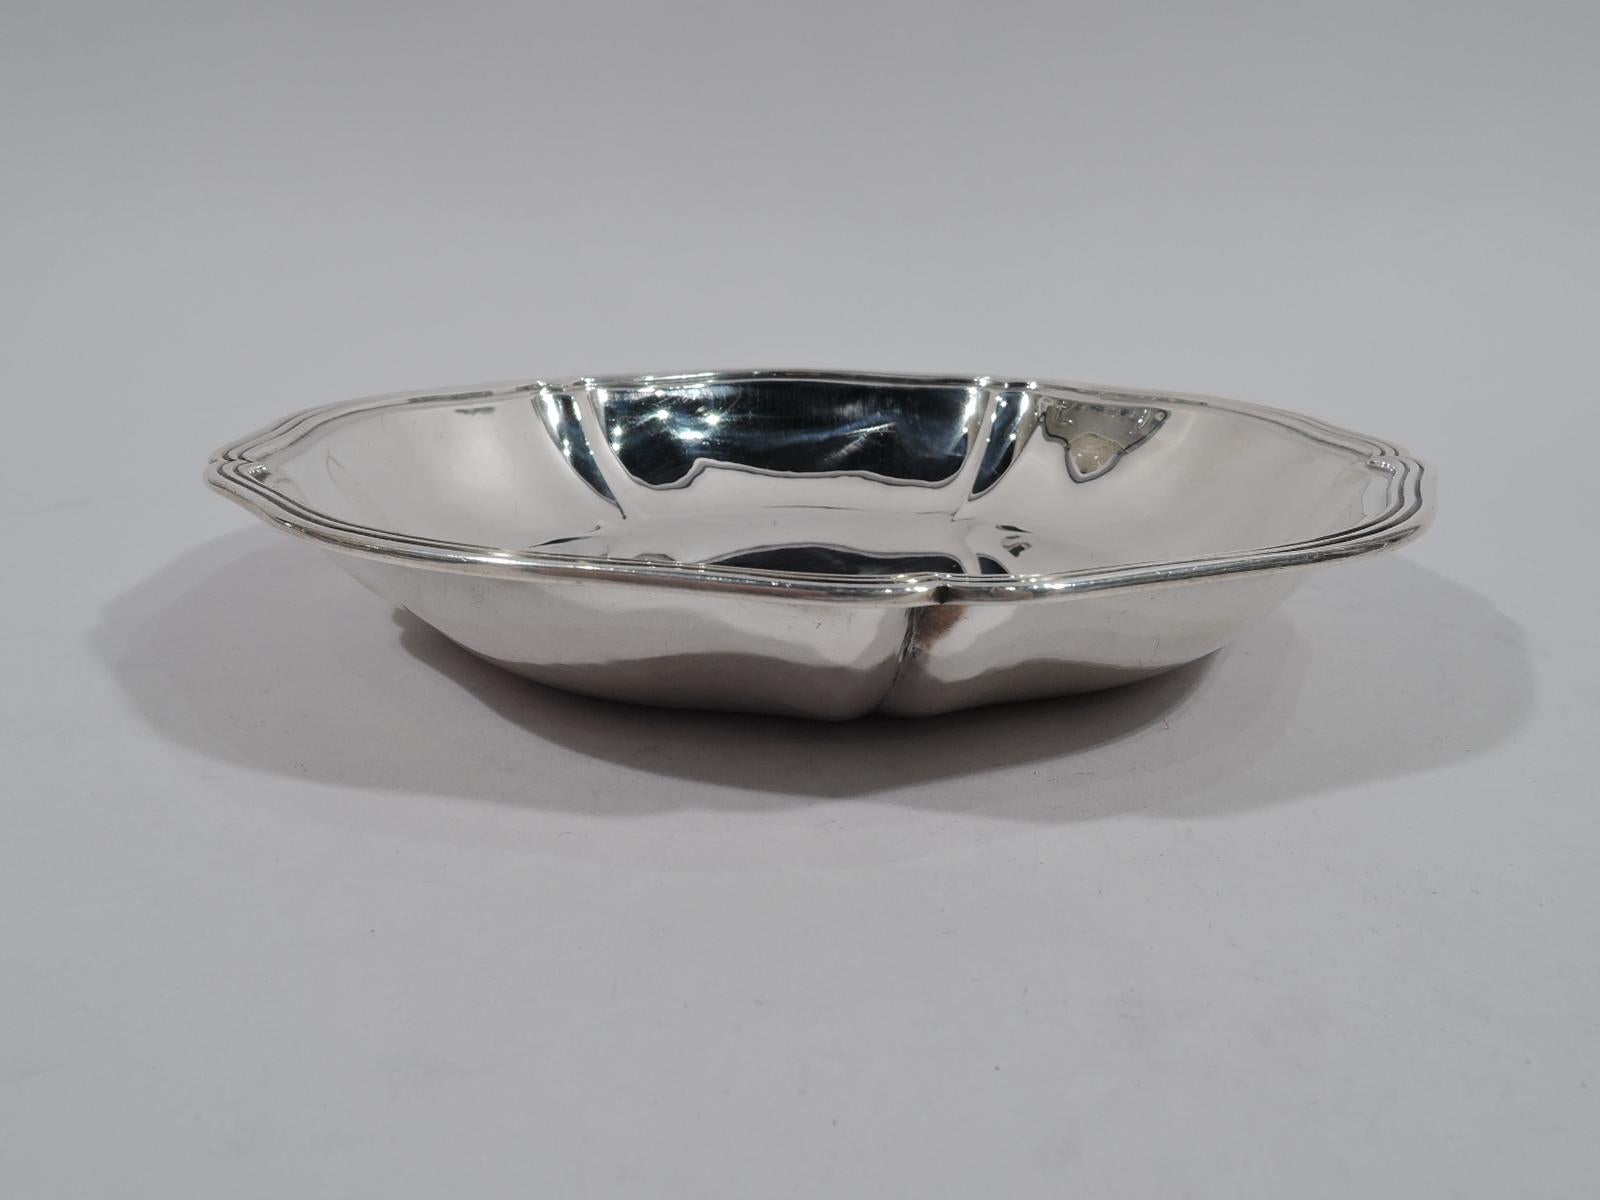 Craftsman sterling silver bowl. Made by Arthur Stone (d. 1937) in Gardner, Mass. Round with slash lobing and gently wavy and reeded rim. Soft and pretty. Fully marked including small-case letter C, which represents a silversmith active from